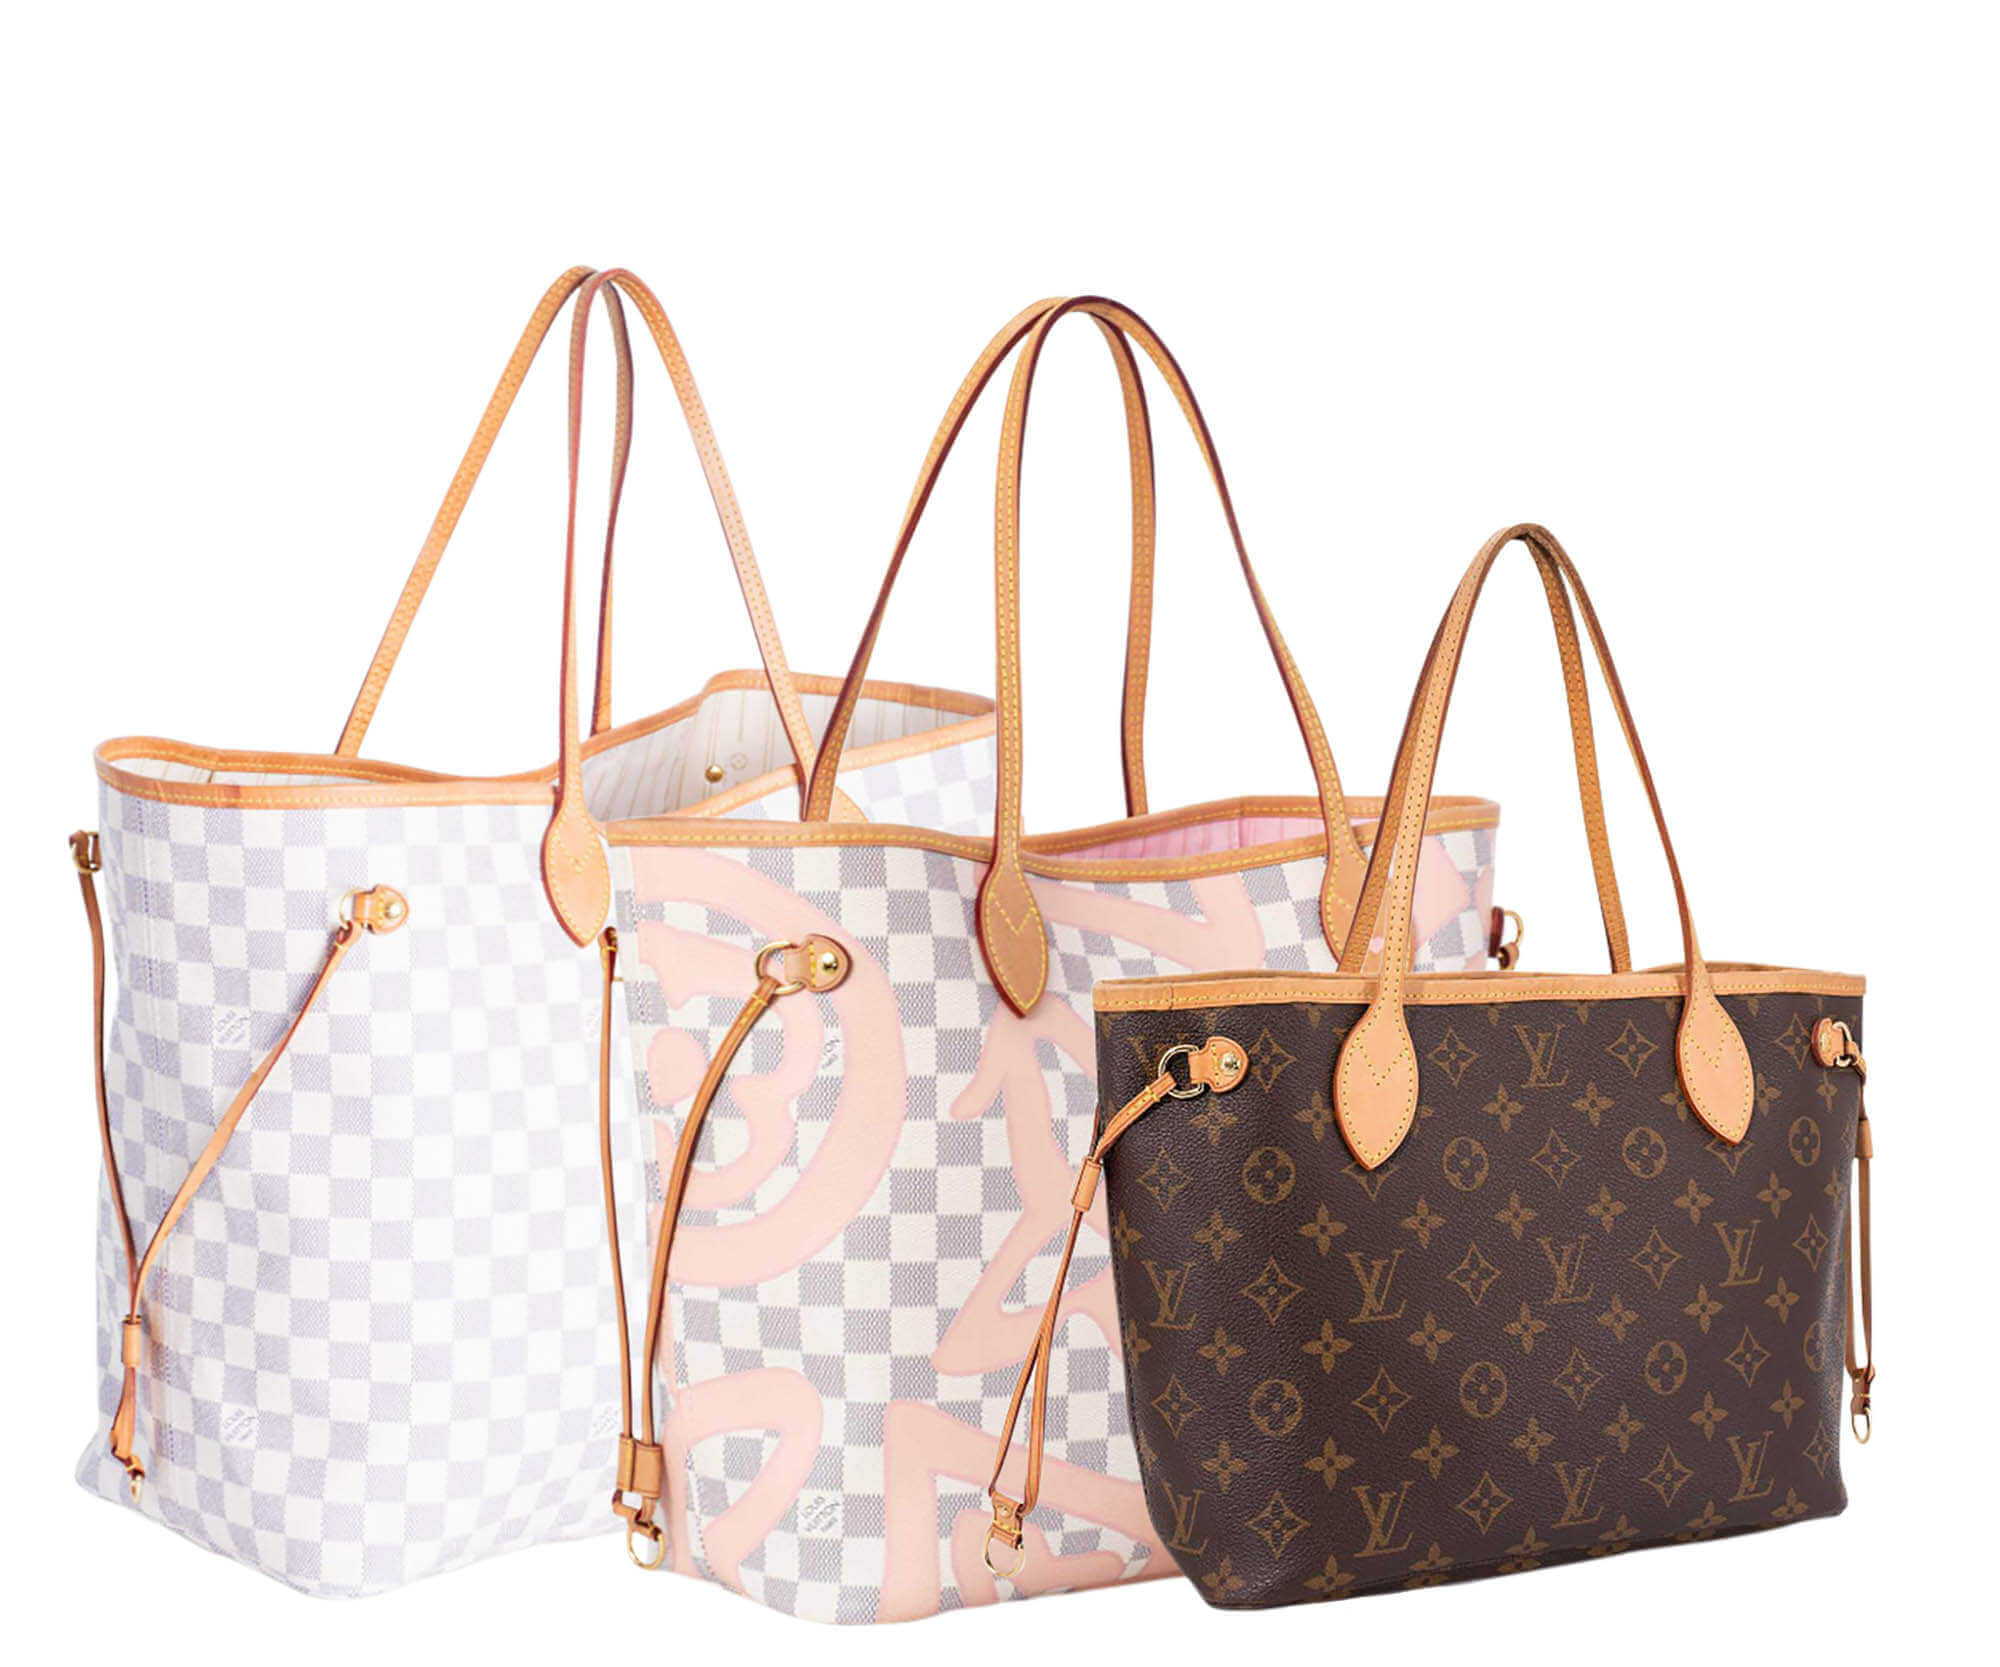 How to Choose the Best Strap for Your Louis Vuitton Handbag Size